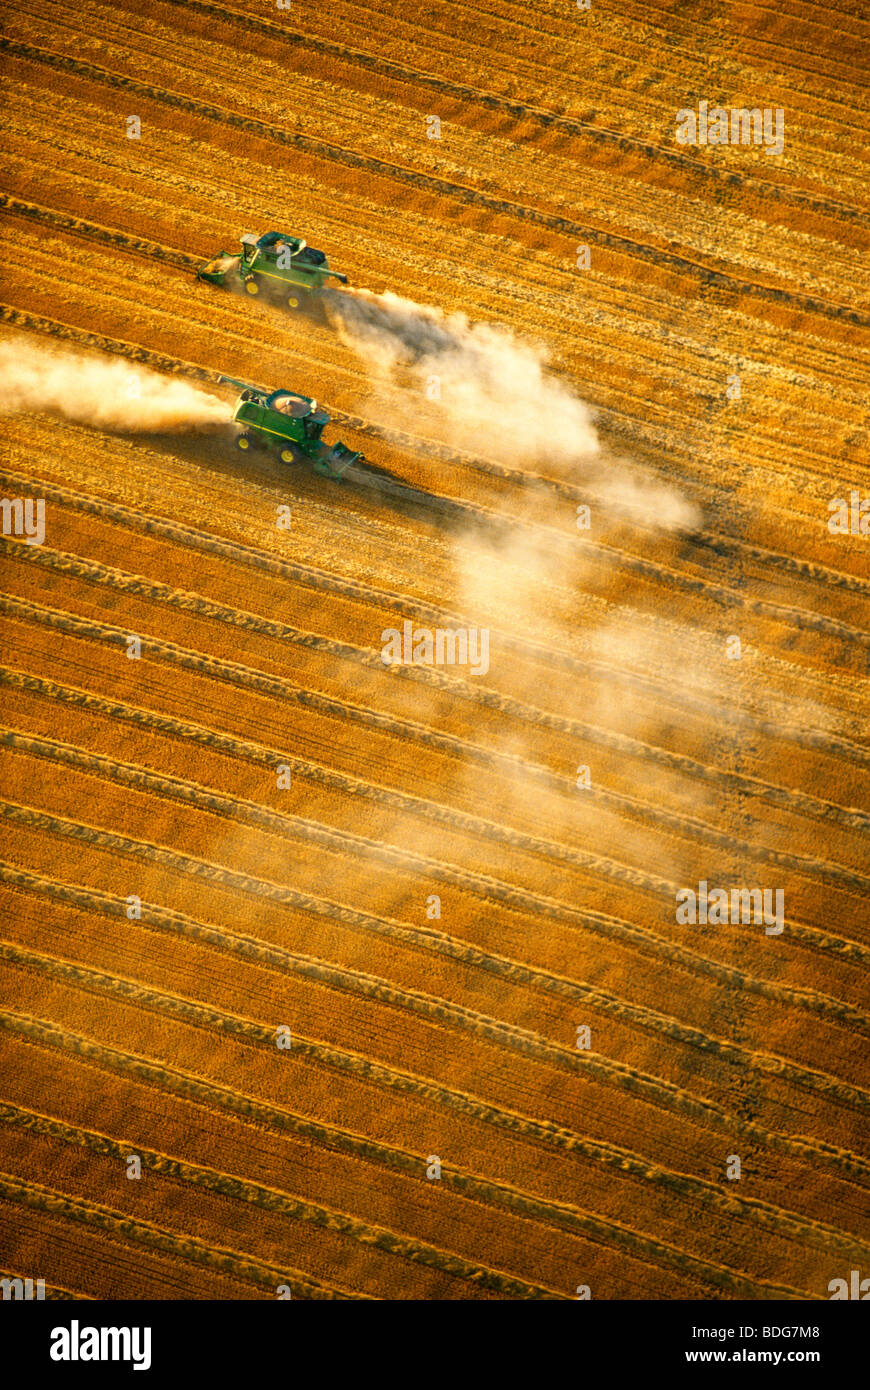 Agriculture - Aerial view of two combines harvesting wheat in late Summer, in bright late afternoon sunlight / Manitoba, Canada. Stock Photo